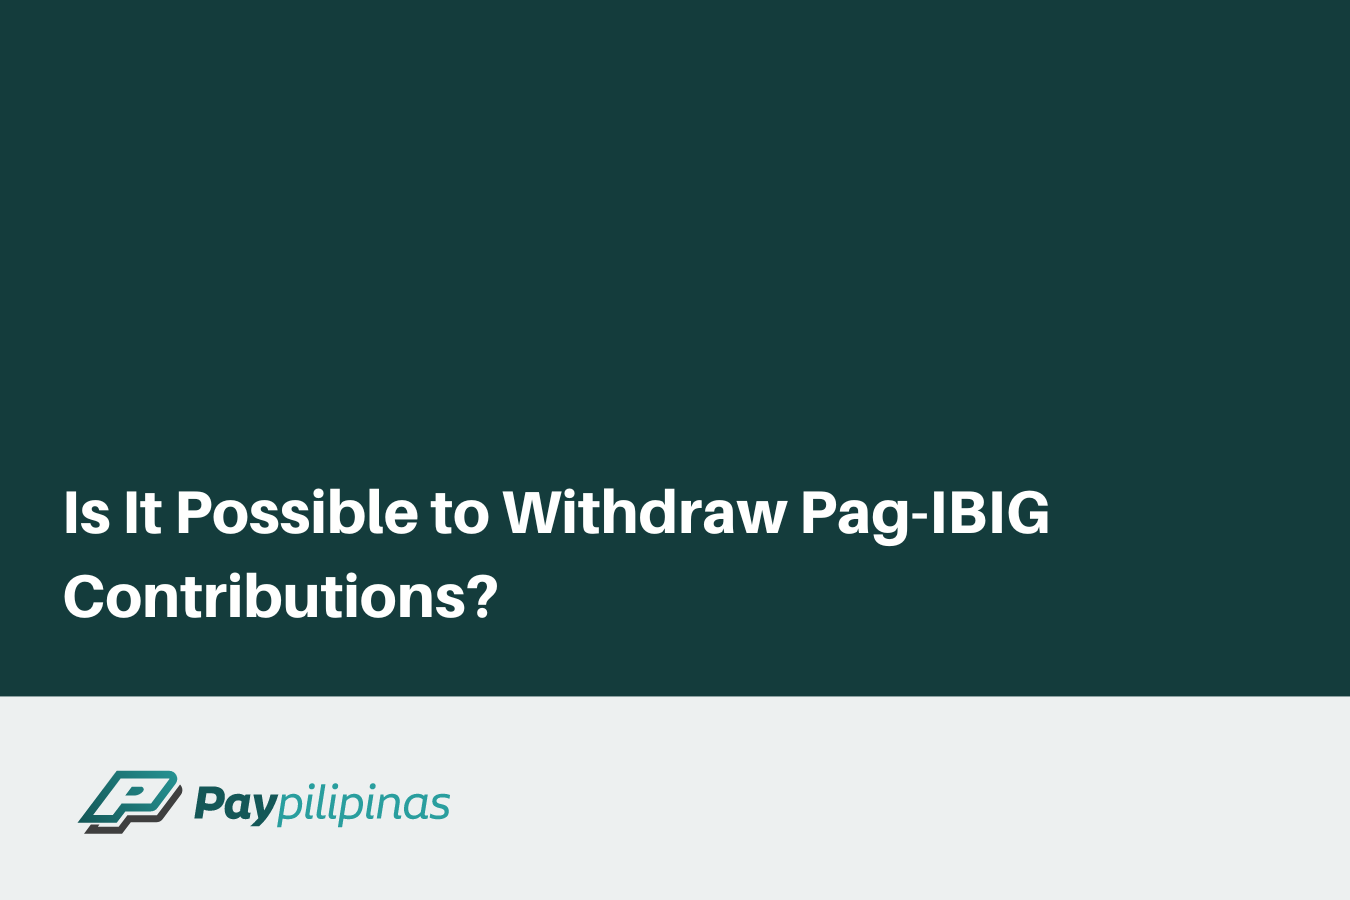 Is It Possible for Members to Withdraw Pag-IBIG Contributions?